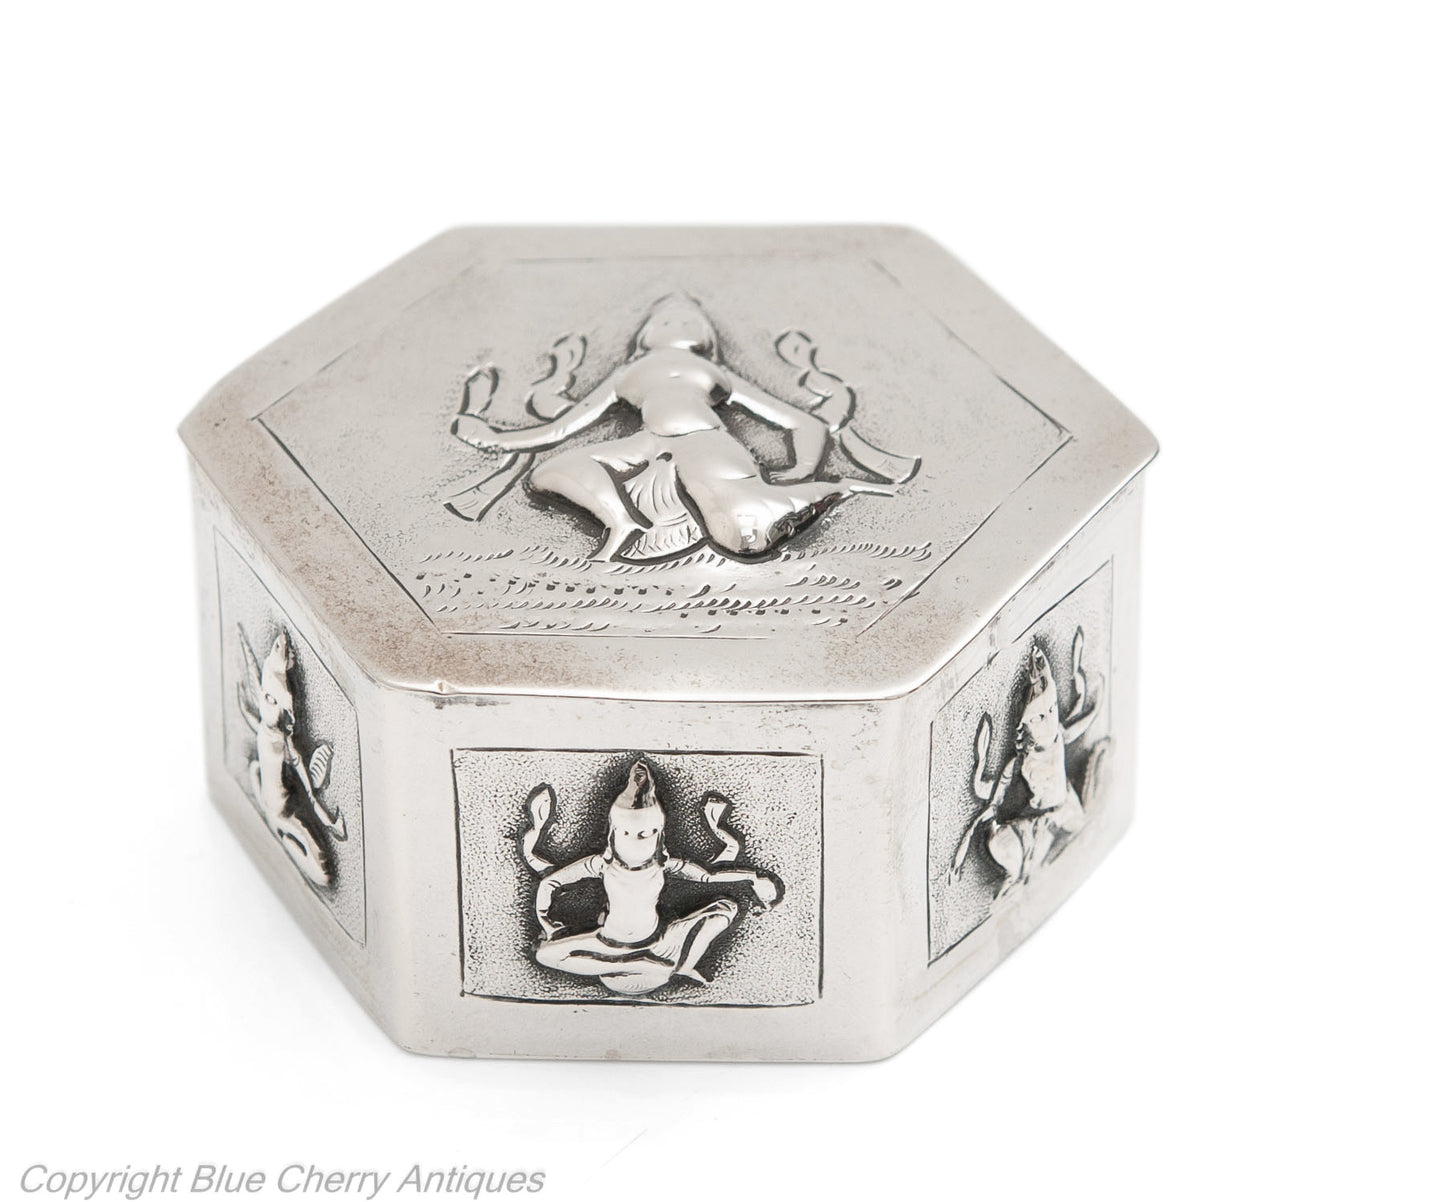 Antique Indian Swami Madras Silver Hexagonal Box with Hindu Gods & Hinged Lid (Code 1679)